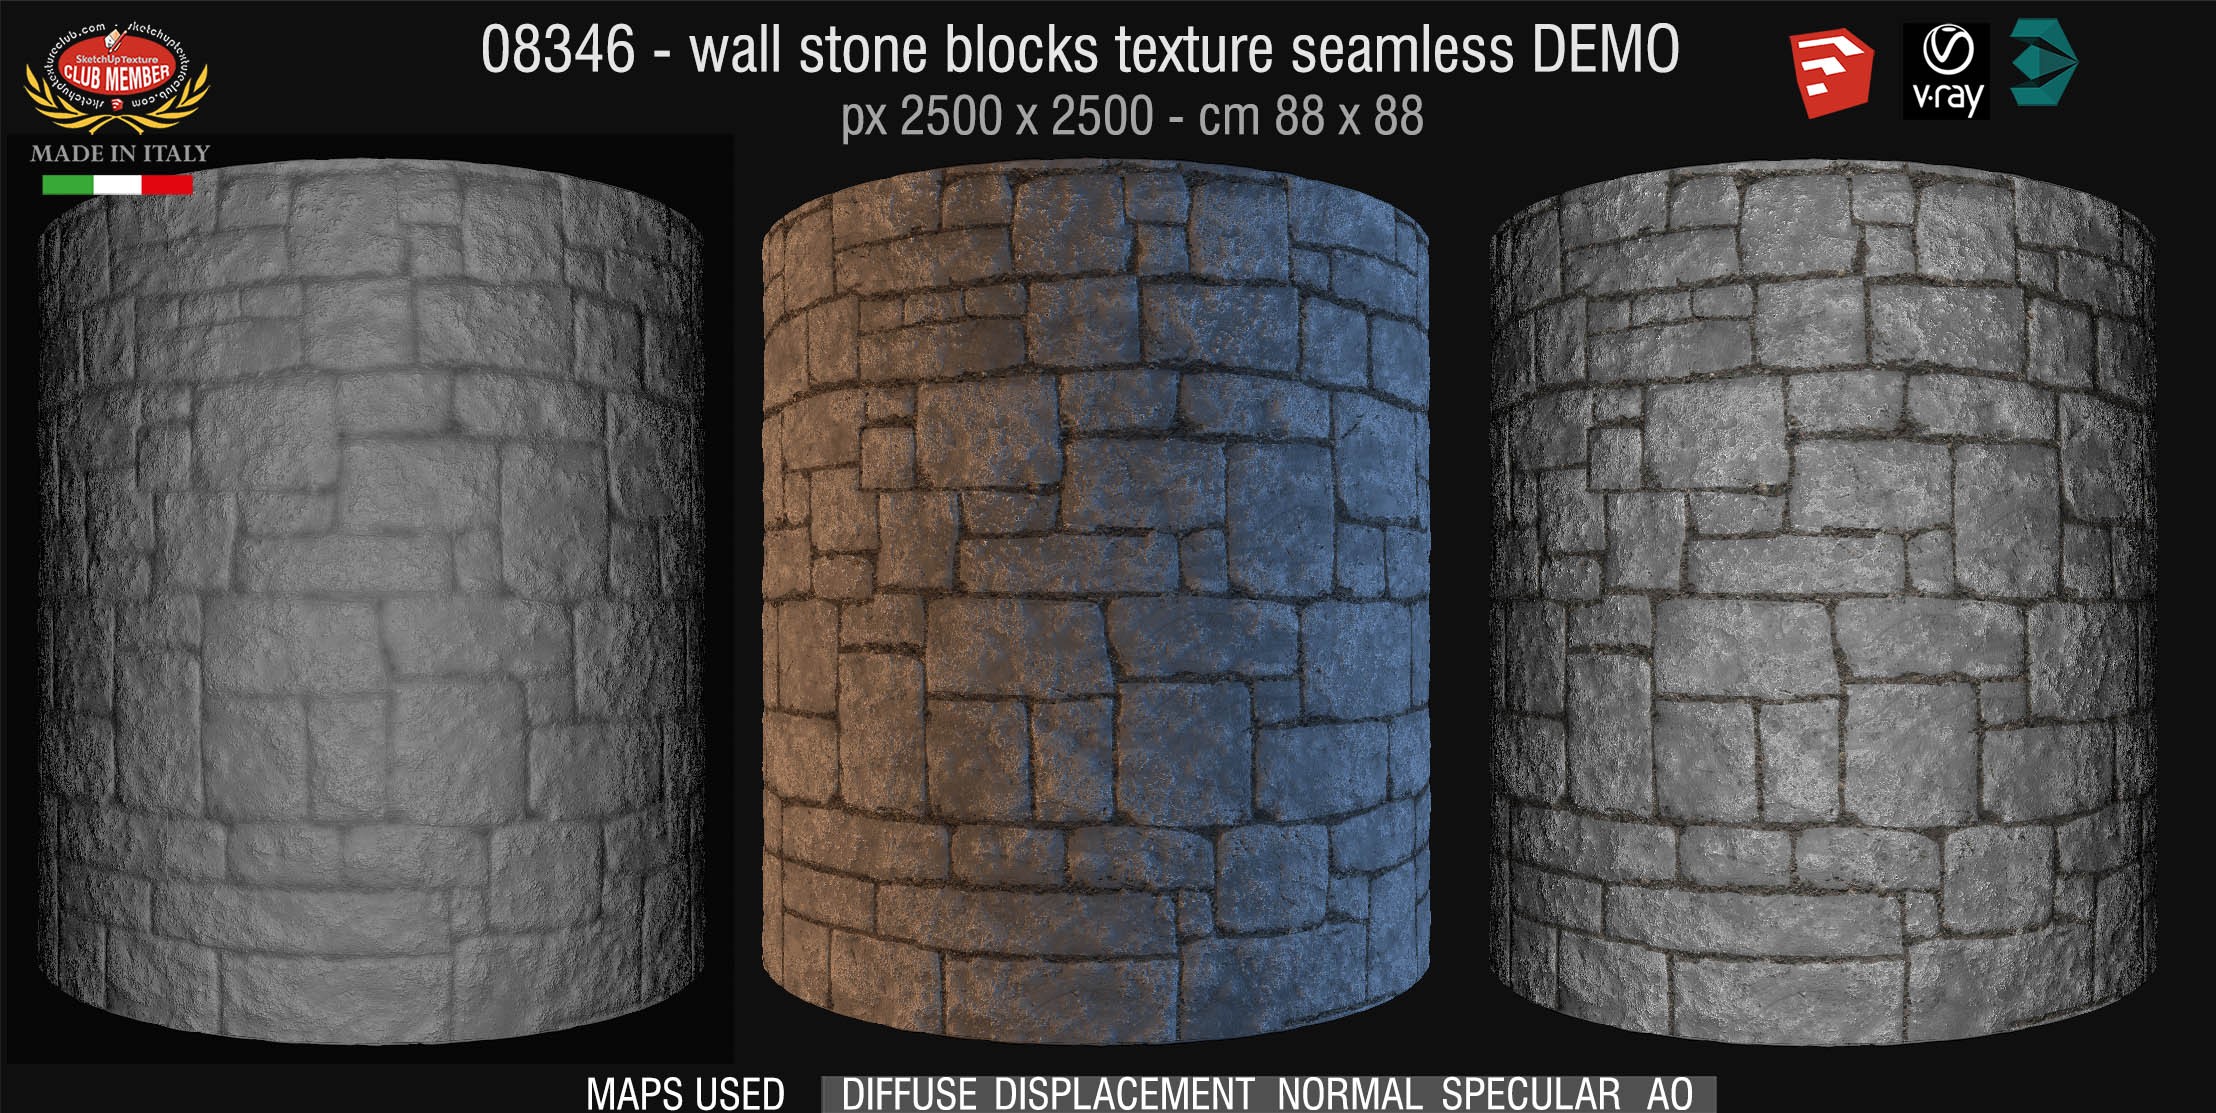 08346 HR Wall stone with regular blocks texture + maps DEMO